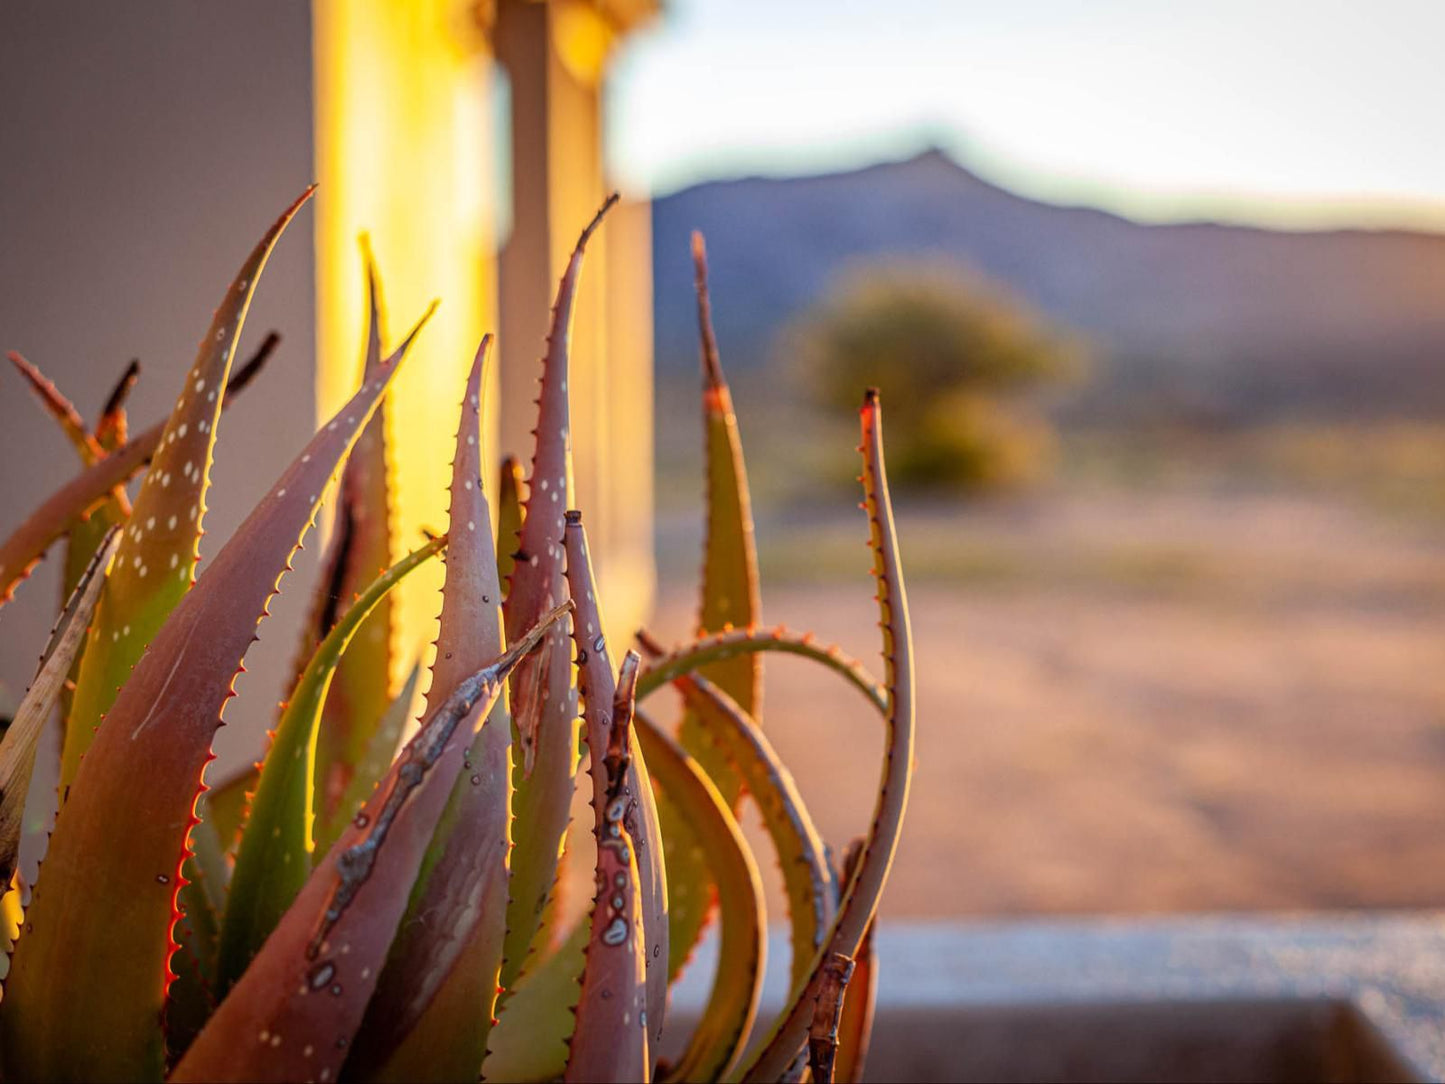 Kamieskroon Cosy Cottages Kamieskroon Northern Cape South Africa Cactus, Plant, Nature